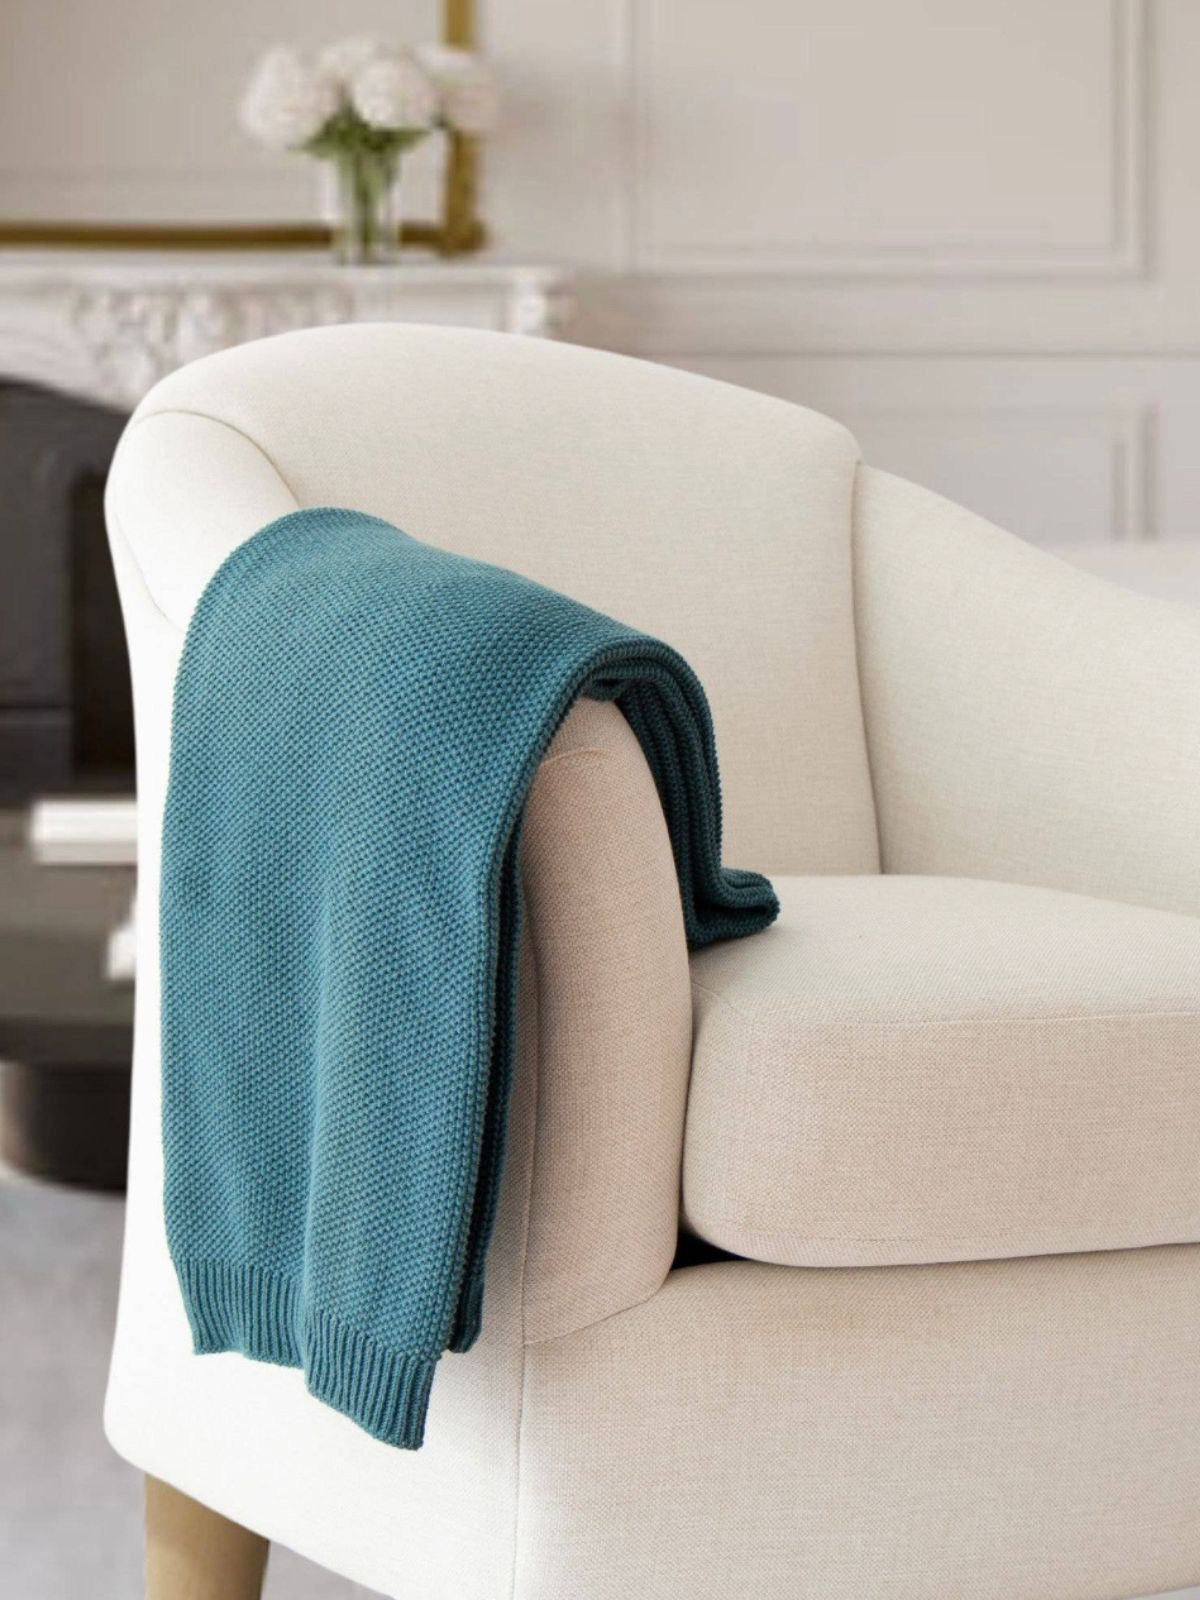 100% Cotton Seedstitch Knit Decorative Throw Blanket Available in Luxury Teal Color Sold by KYA Home Decor, 50W x 60L. 